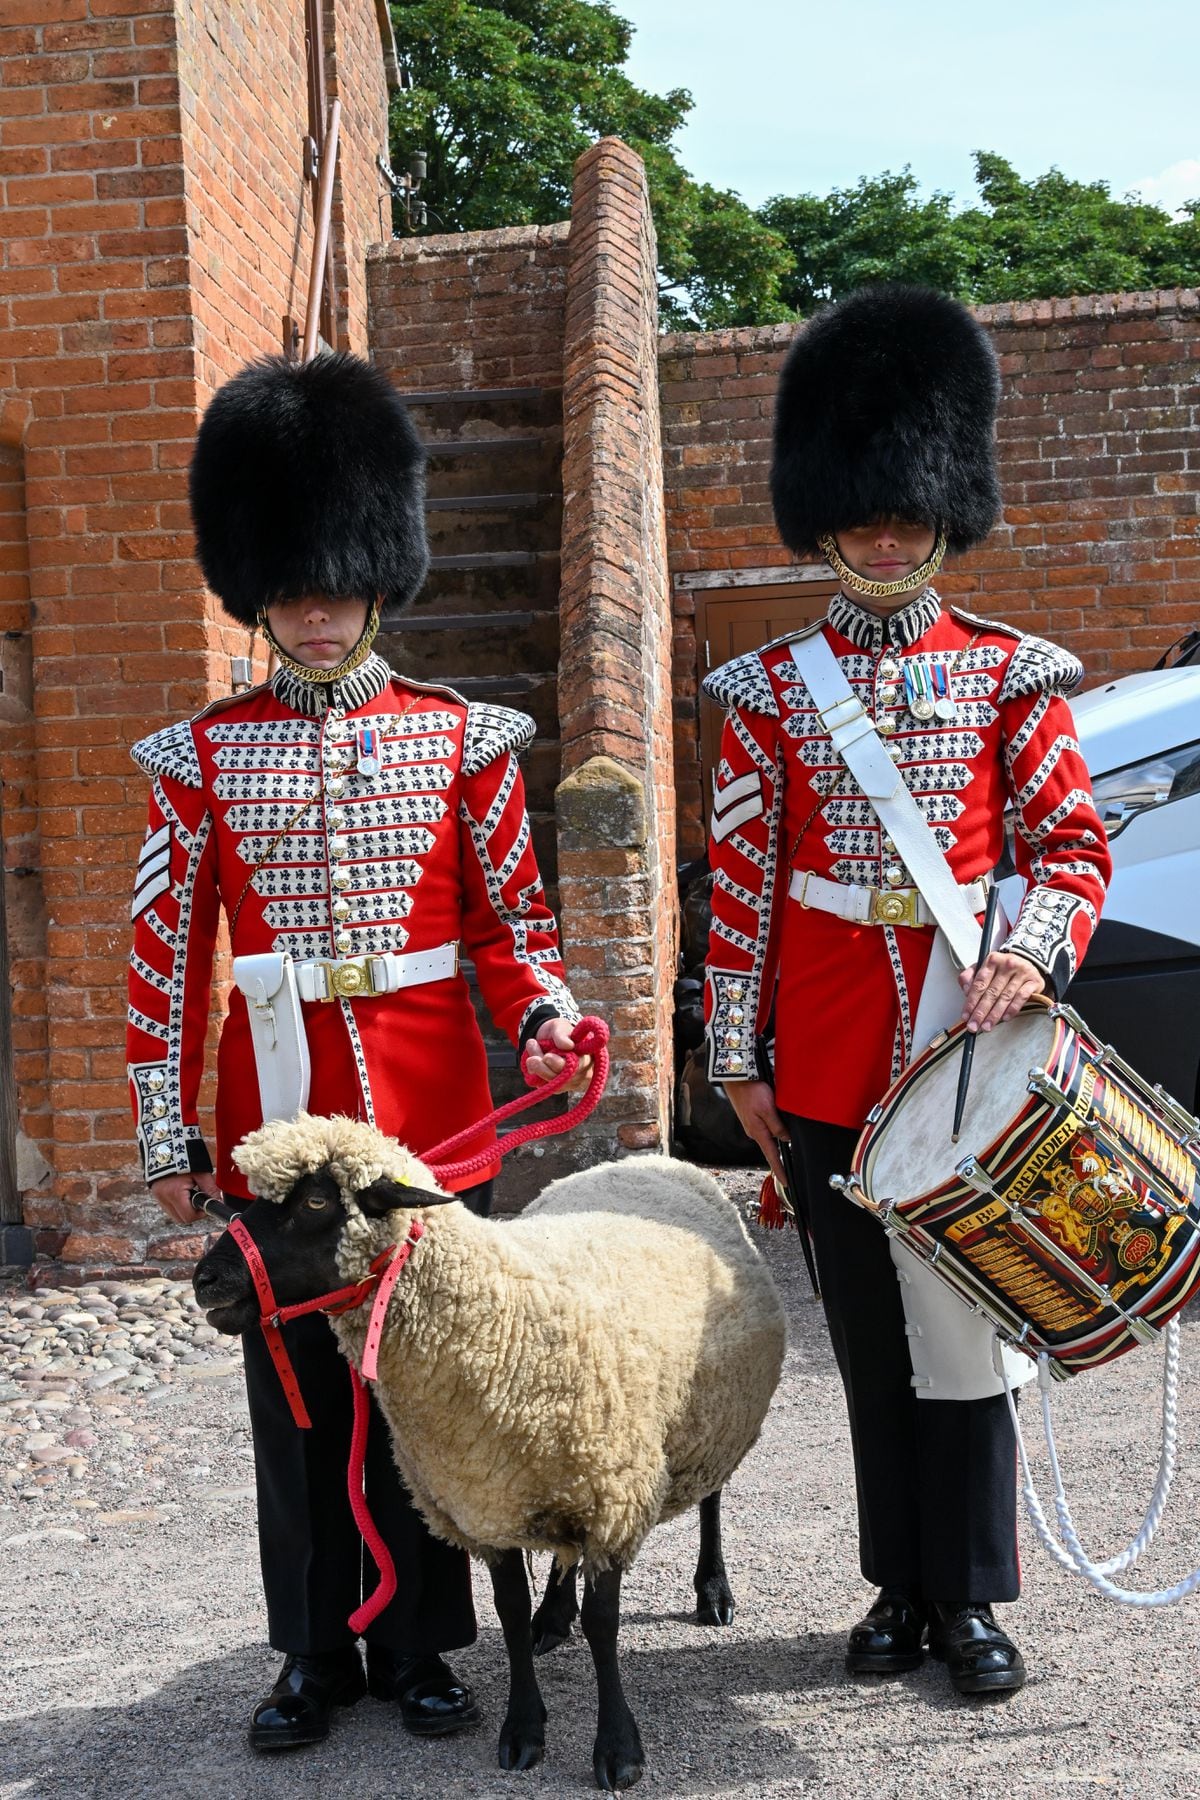 Guards with Maureen the sheep